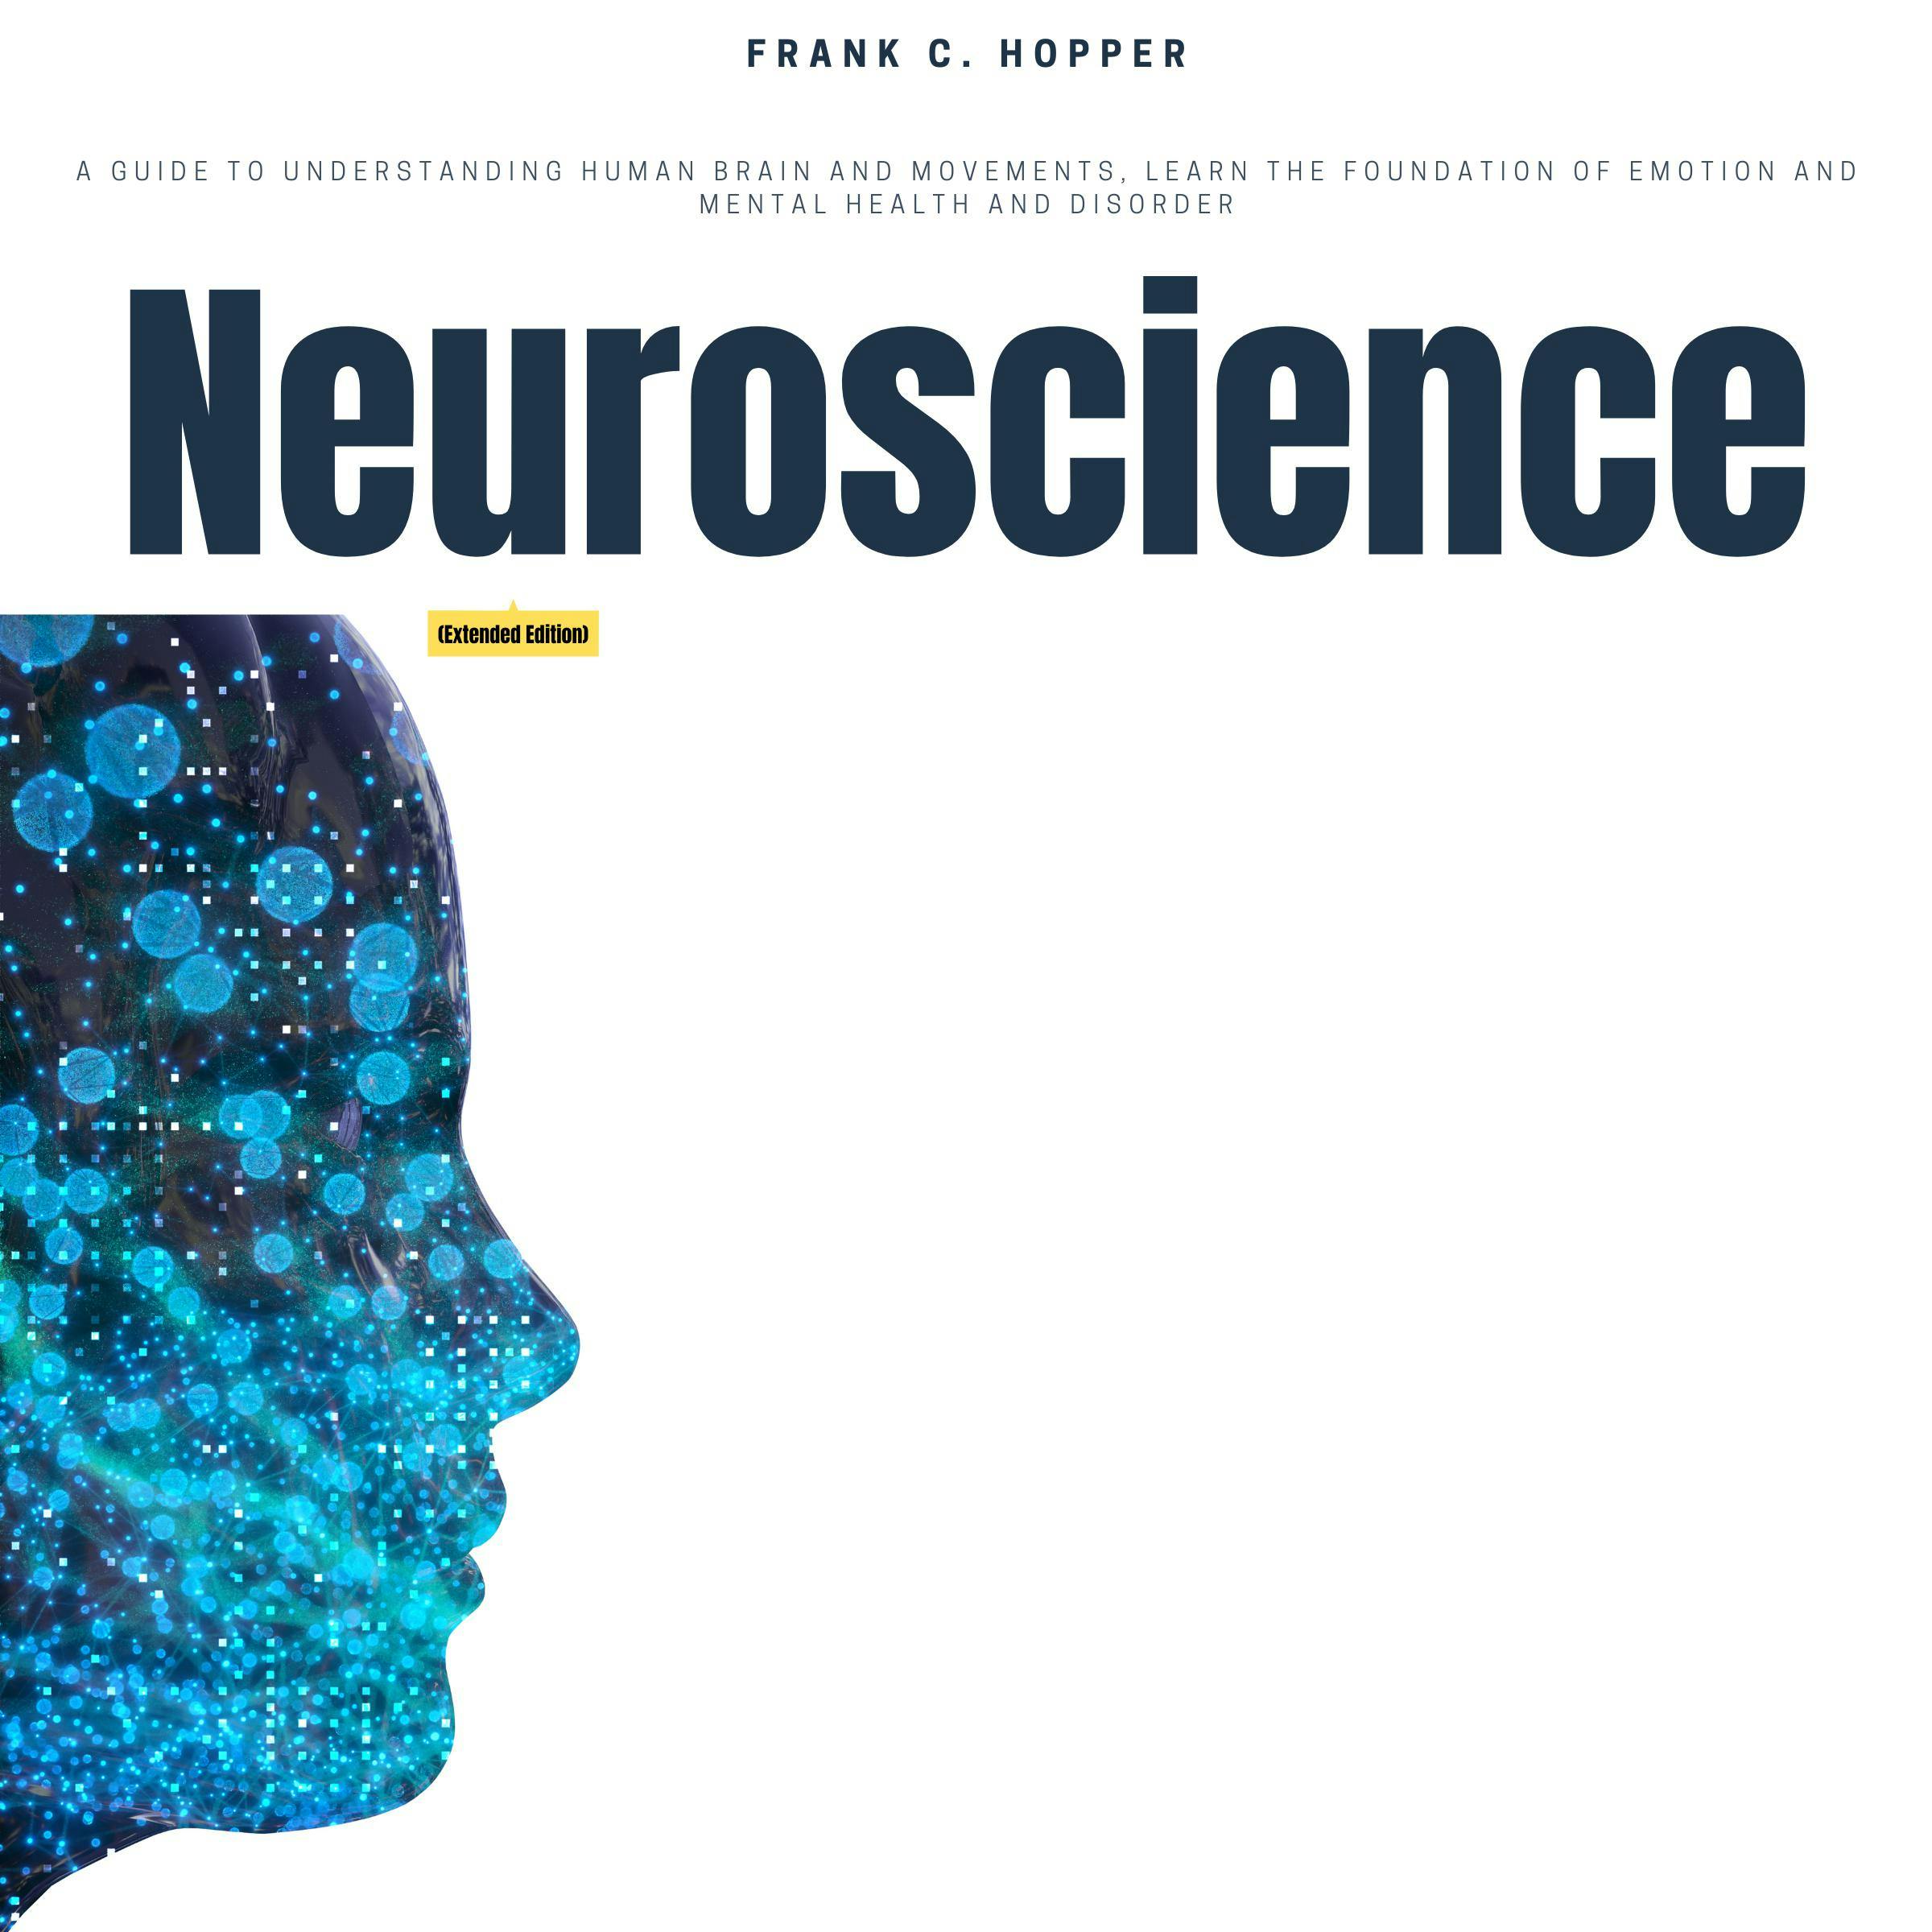 Neuroscience (Extended Edition): A Guide to Understanding Human Brain and Movements, Learn the Foundation of Emotion and Mental Health and Disorder - undefined